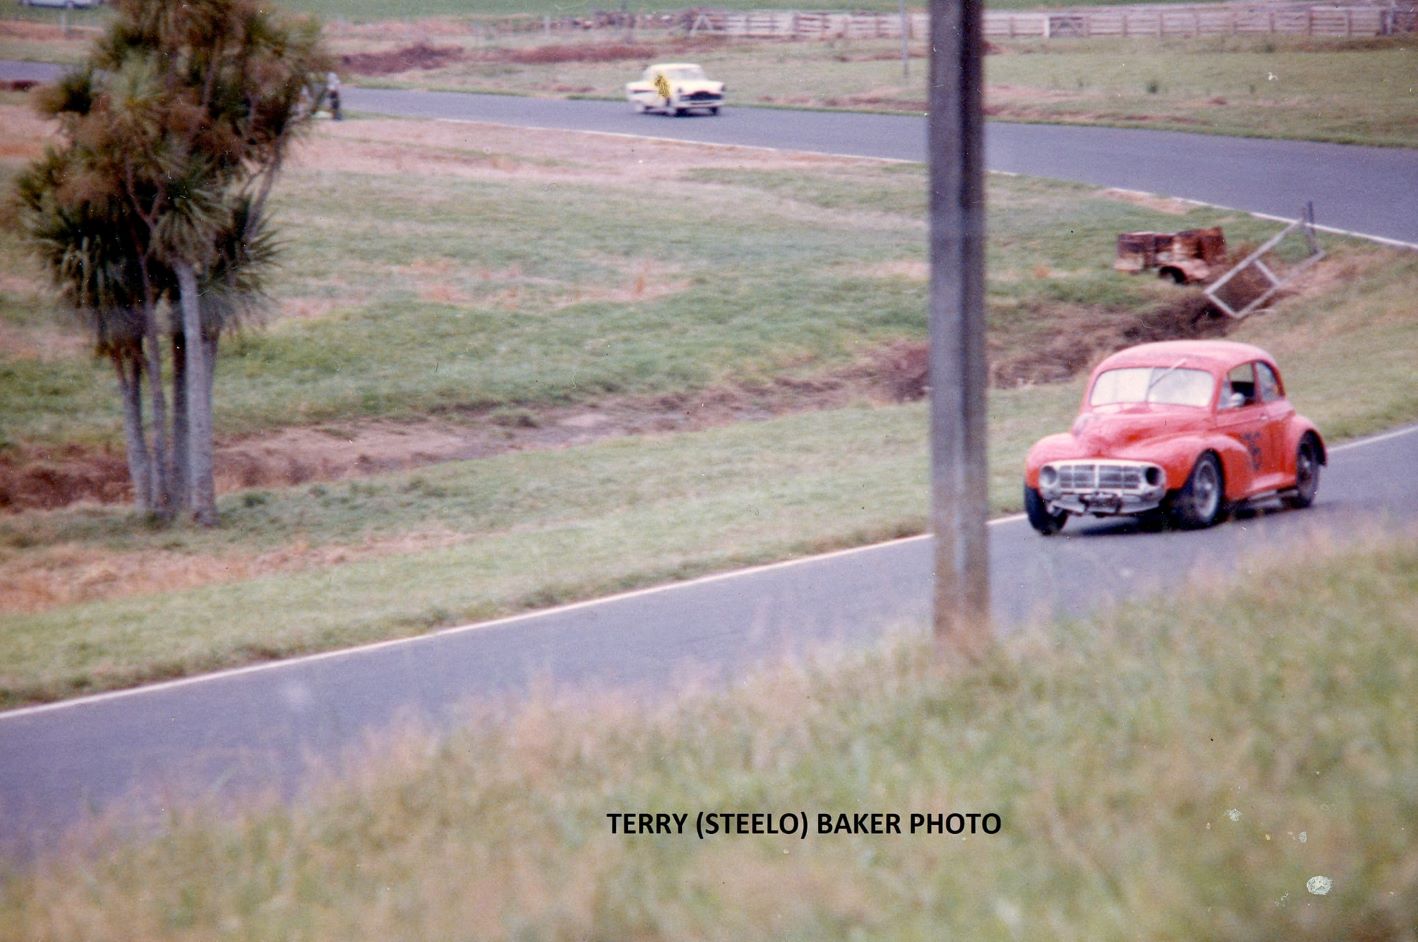 Name:  Pukekohe 1965 #039 Morrari coming over Rothmans 1965 NZGP 180kb arch J L Lawton photo Terry Stee.jpg
Views: 44
Size:  180.0 KB